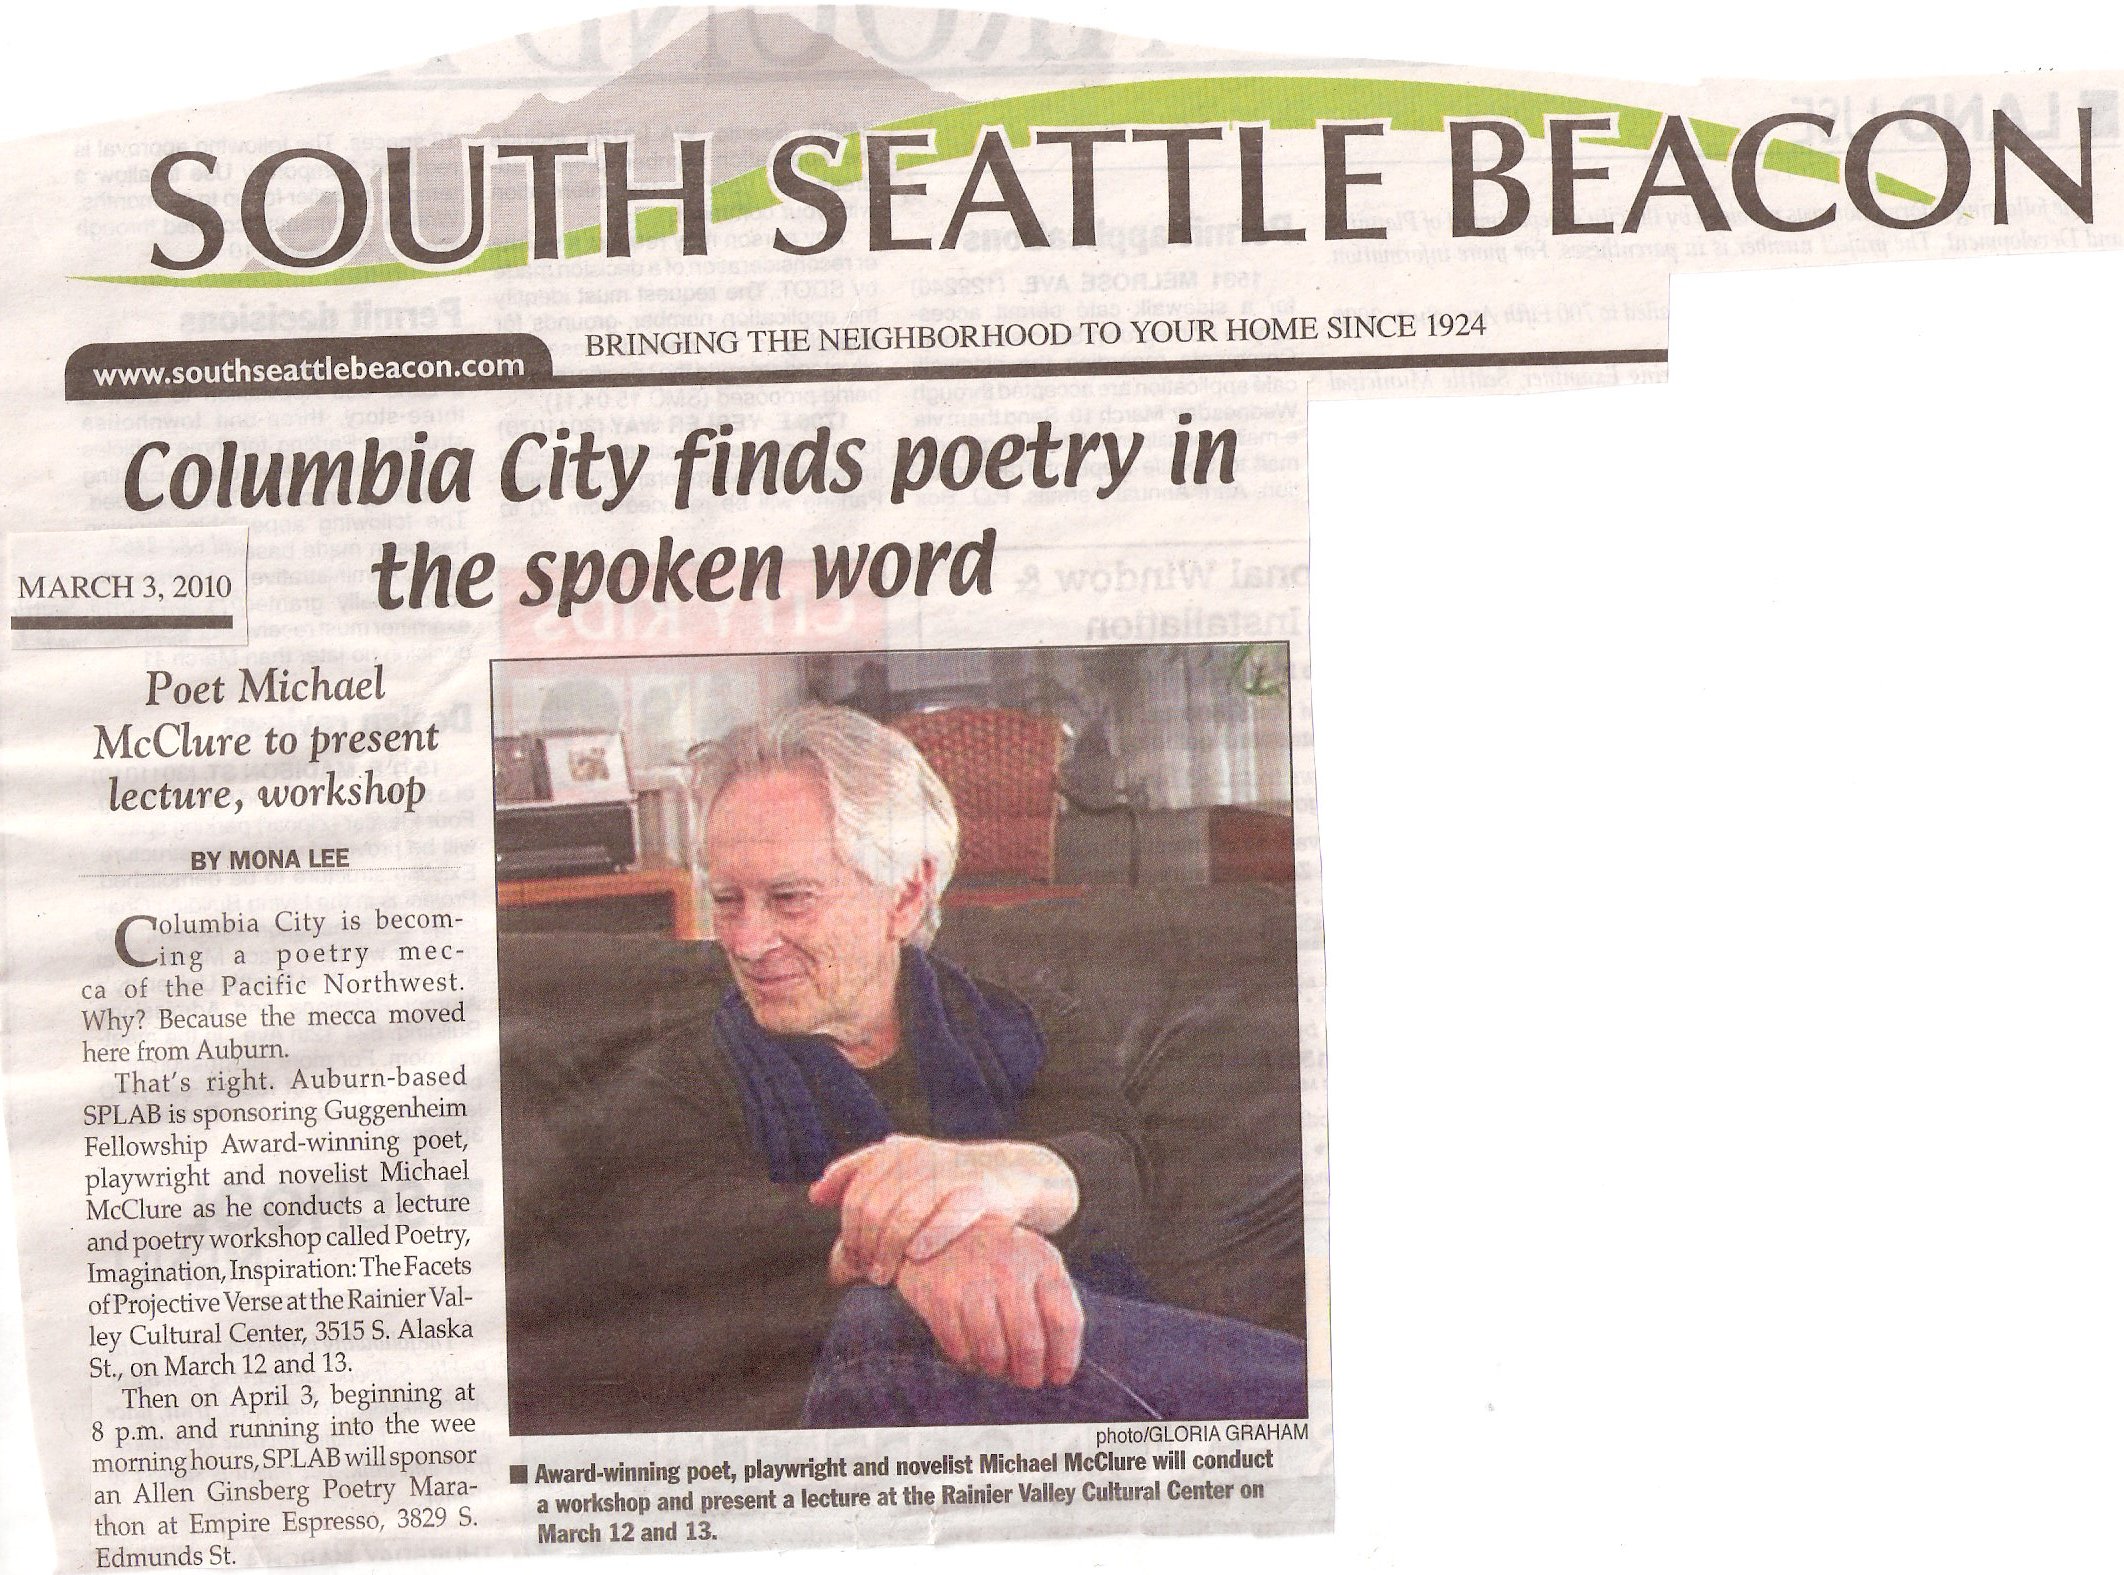 McClure news article, March 3, 2010 South Seattle Beacon